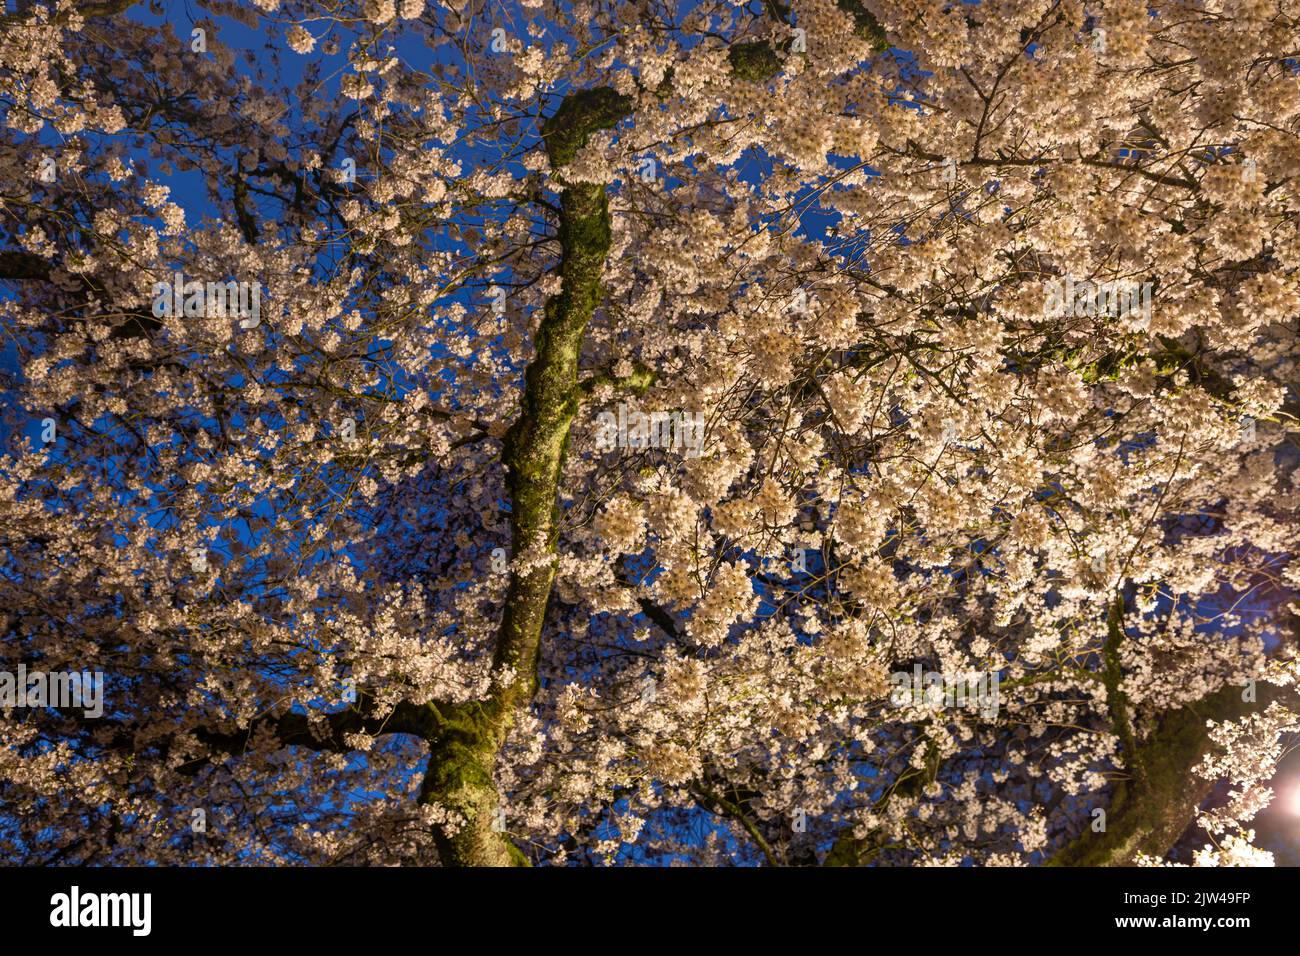 WA21939-00...WASHINGTON - Venerable cherry tree in bloom, lit by an ornamental cherry in the early morning hours on The Quad at  UW, Seattle campus. Stock Photo